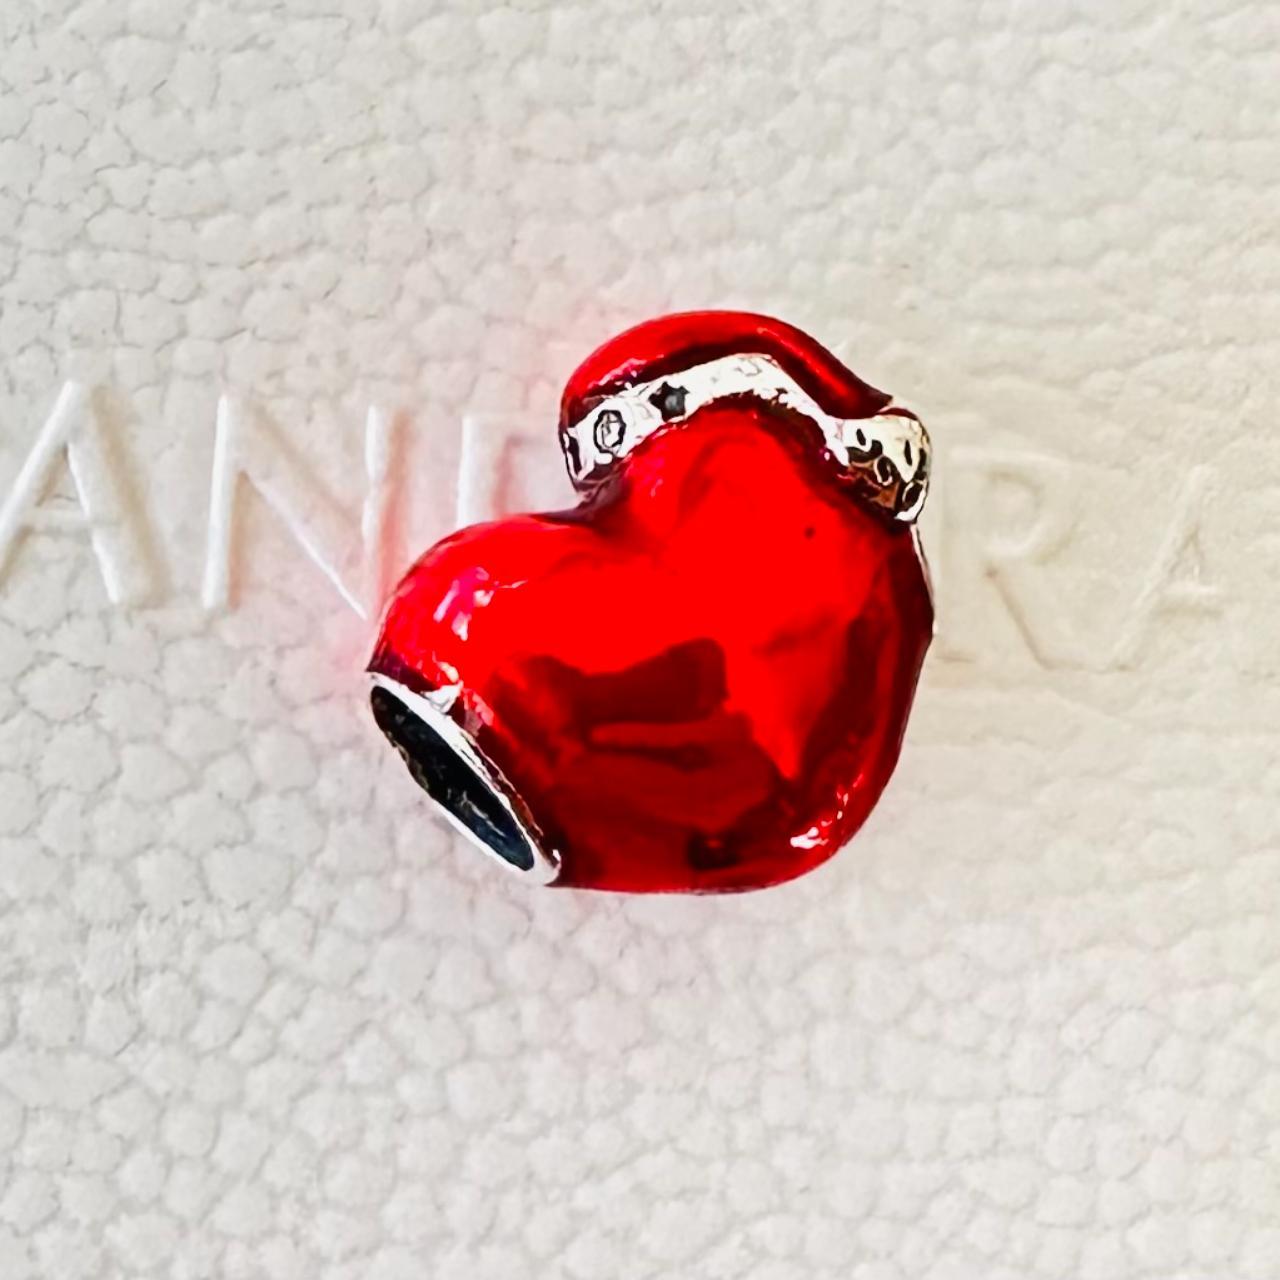 Metallic Red Christmas Heart Charm, Sterling silver